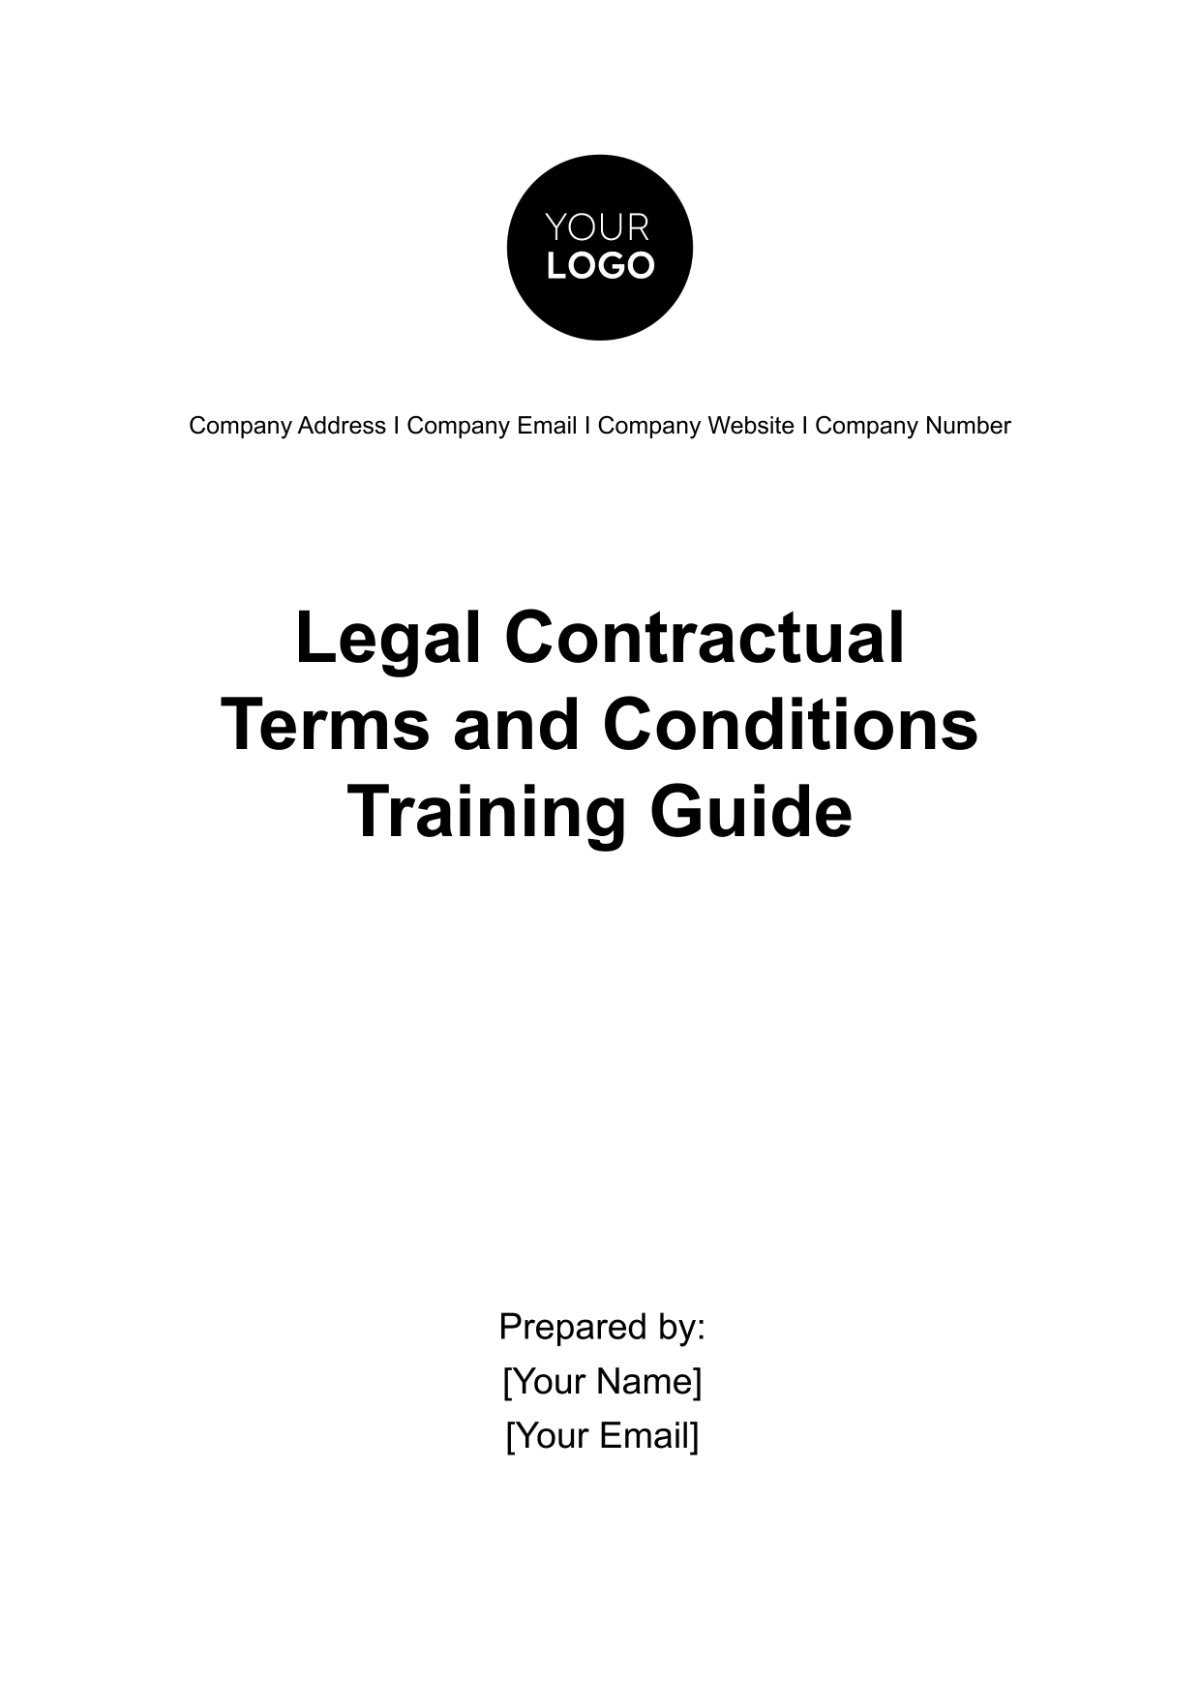 Legal Contractual Terms and Conditions Training Guide Template